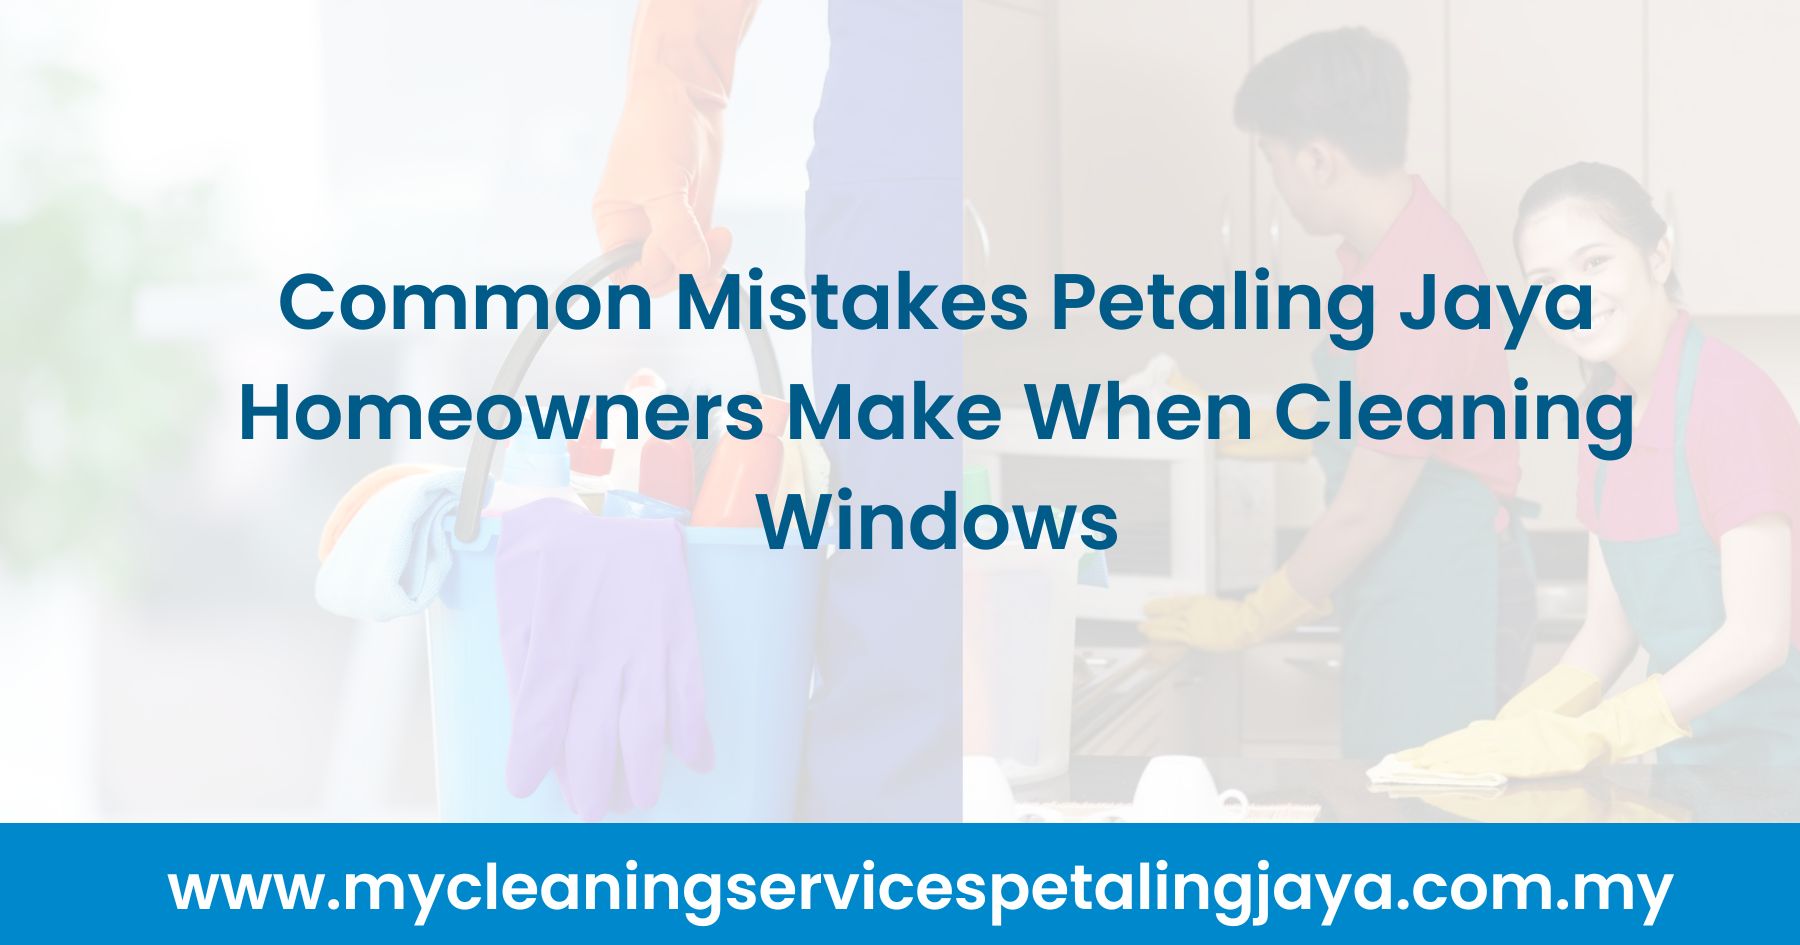 Common Mistakes Petaling Jaya Homeowners Make When Cleaning Windows